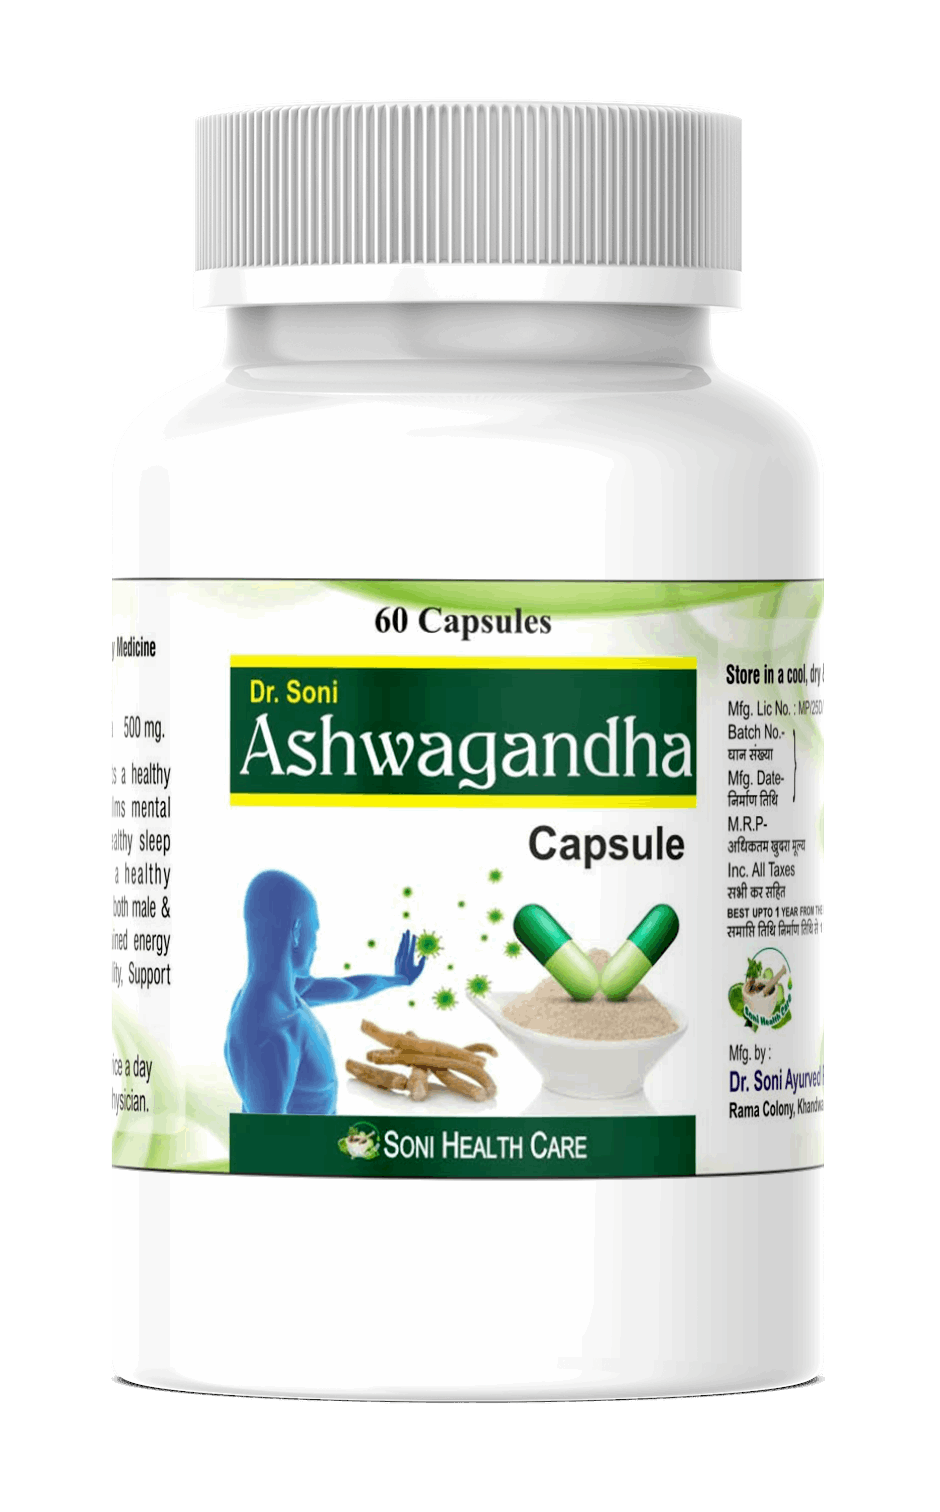 Dr.Soni Ashwagandha ayurvedic capsule stress relief Capsules for Improves Muscles Strength, Energy and Immunity Booster,Stress, Ashwagandha Capsules (Pack of 60 Capsules ),Ashwagandha Ayurvedic Capsules